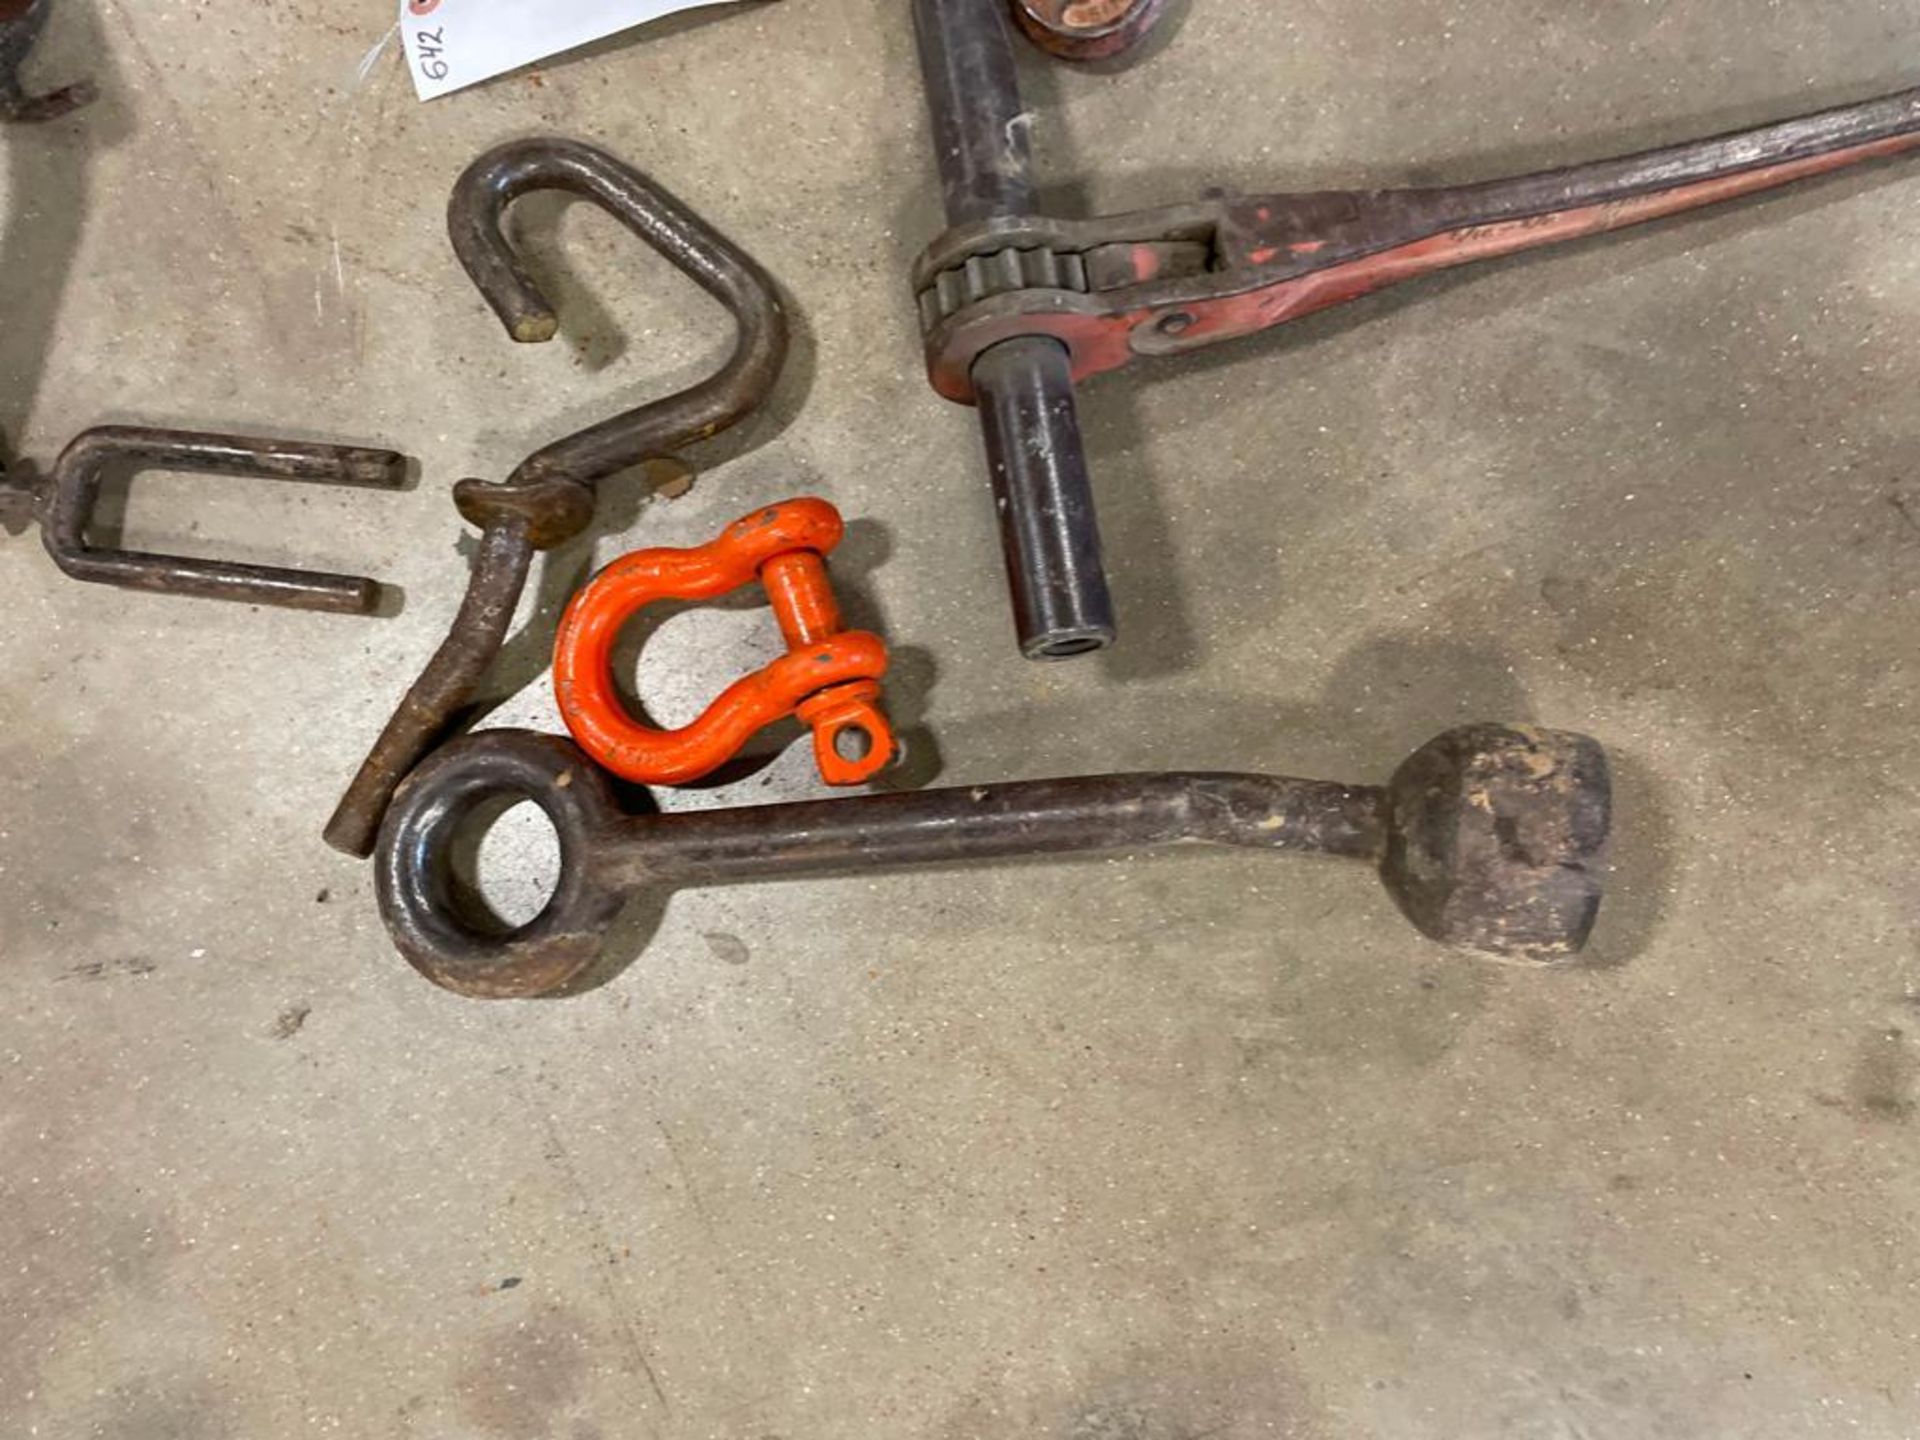 Miscellaneous, Ratchet Binder, Anchar Shackle, Etc.  Located in Hazelwood, MO - Image 2 of 5